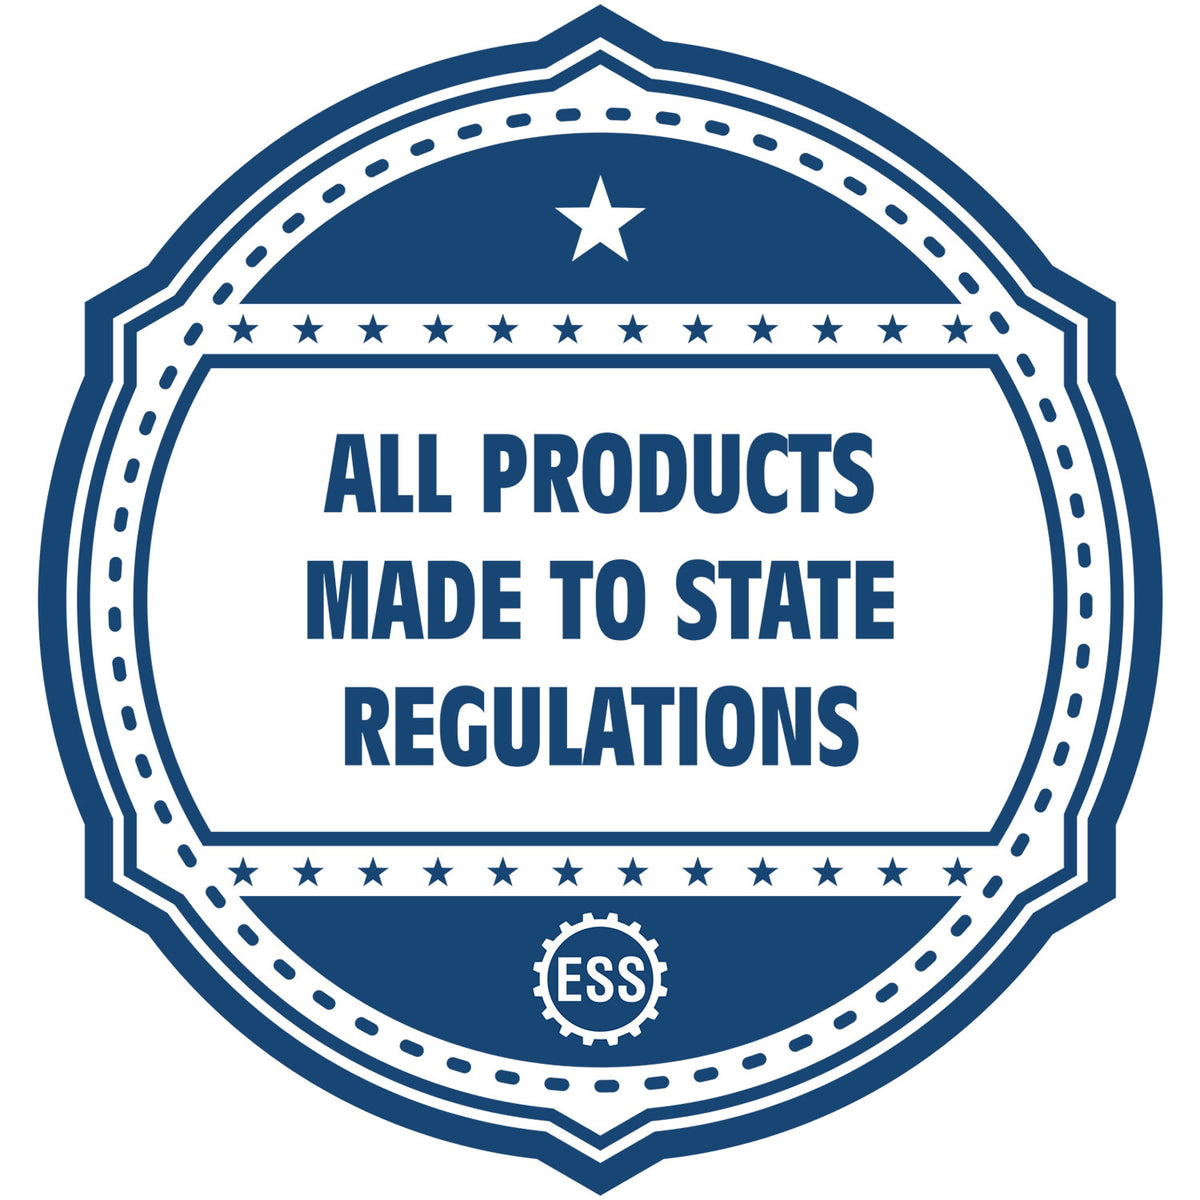 An icon or badge element for the Self-Inking North Carolina PE Stamp showing that this product is made in compliance with state regulations.